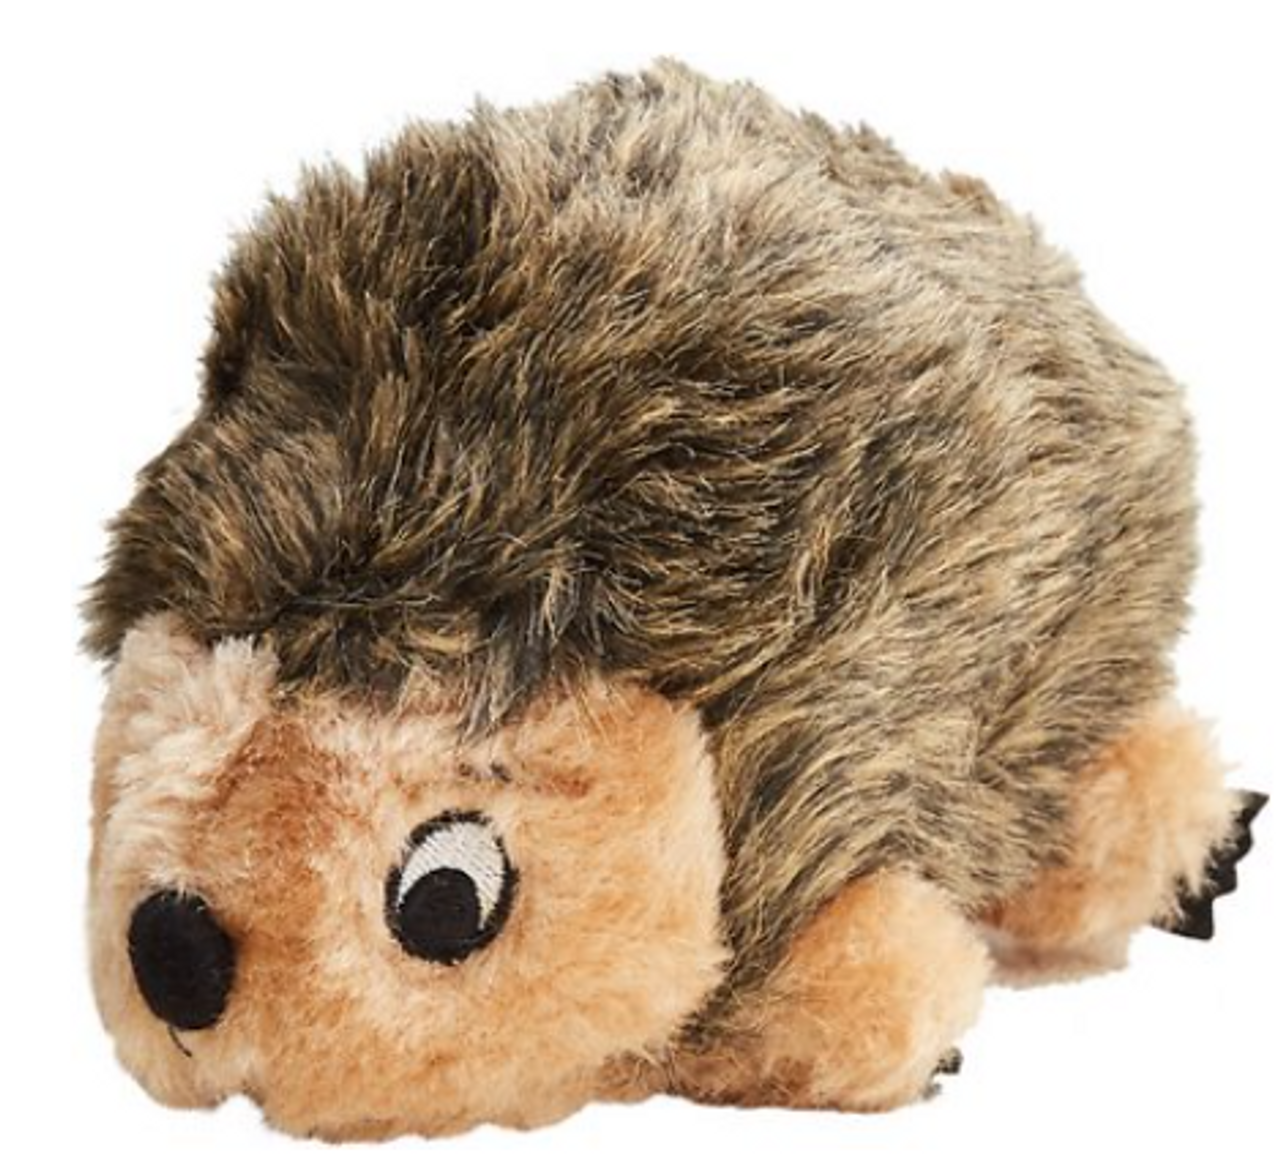 https://cdn11.bigcommerce.com/s-nyt6bnql2y/images/stencil/1280x1280/products/13706/34970/Outward_Hound_Hedgehogz_Squeaking_Small_Plush_Dog_Toy23721_1__07428__60118.1637253358.PNG?c=1